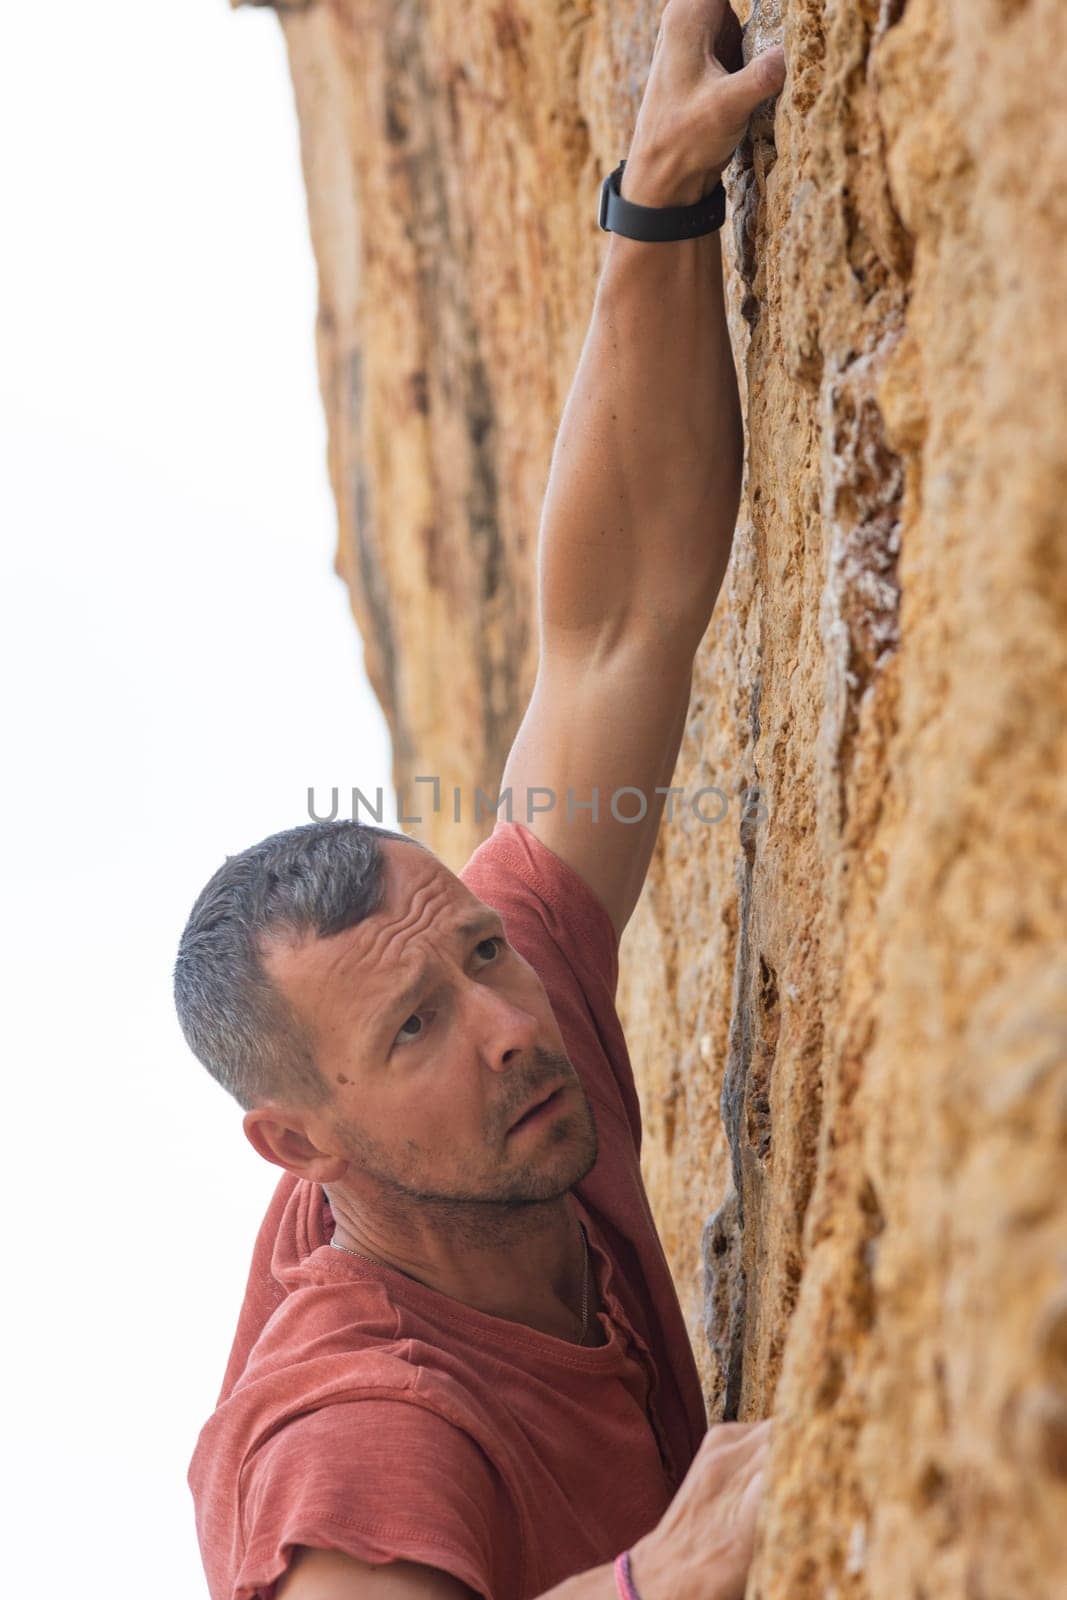 A man in a red shirt is climbing a rock wall. He is wearing a wristwatch and a black band